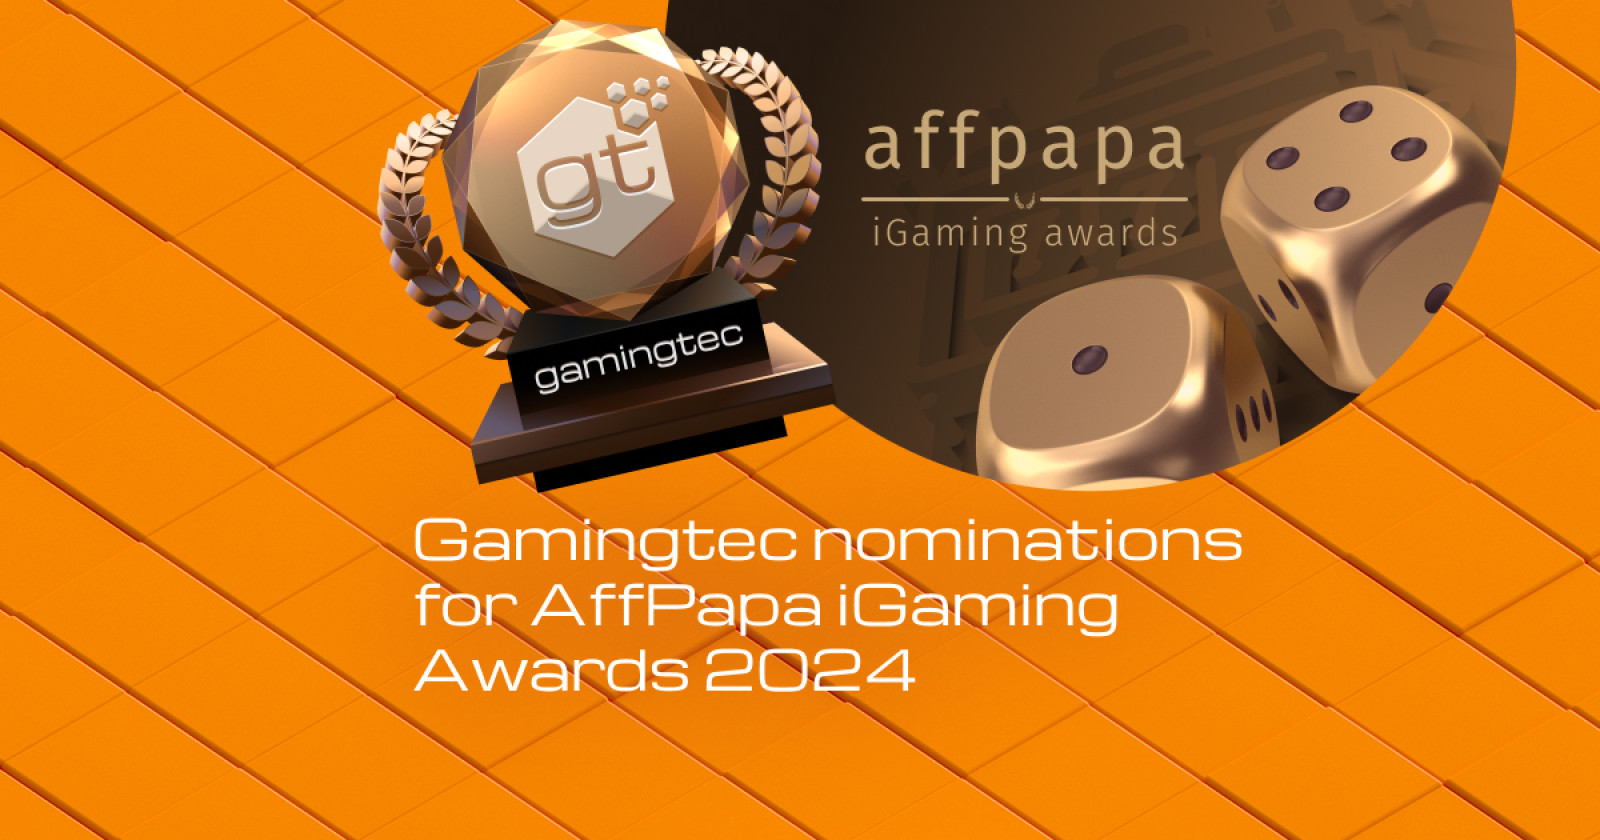 Gamingtec is Nominated for the AffPapa iGaming Awards